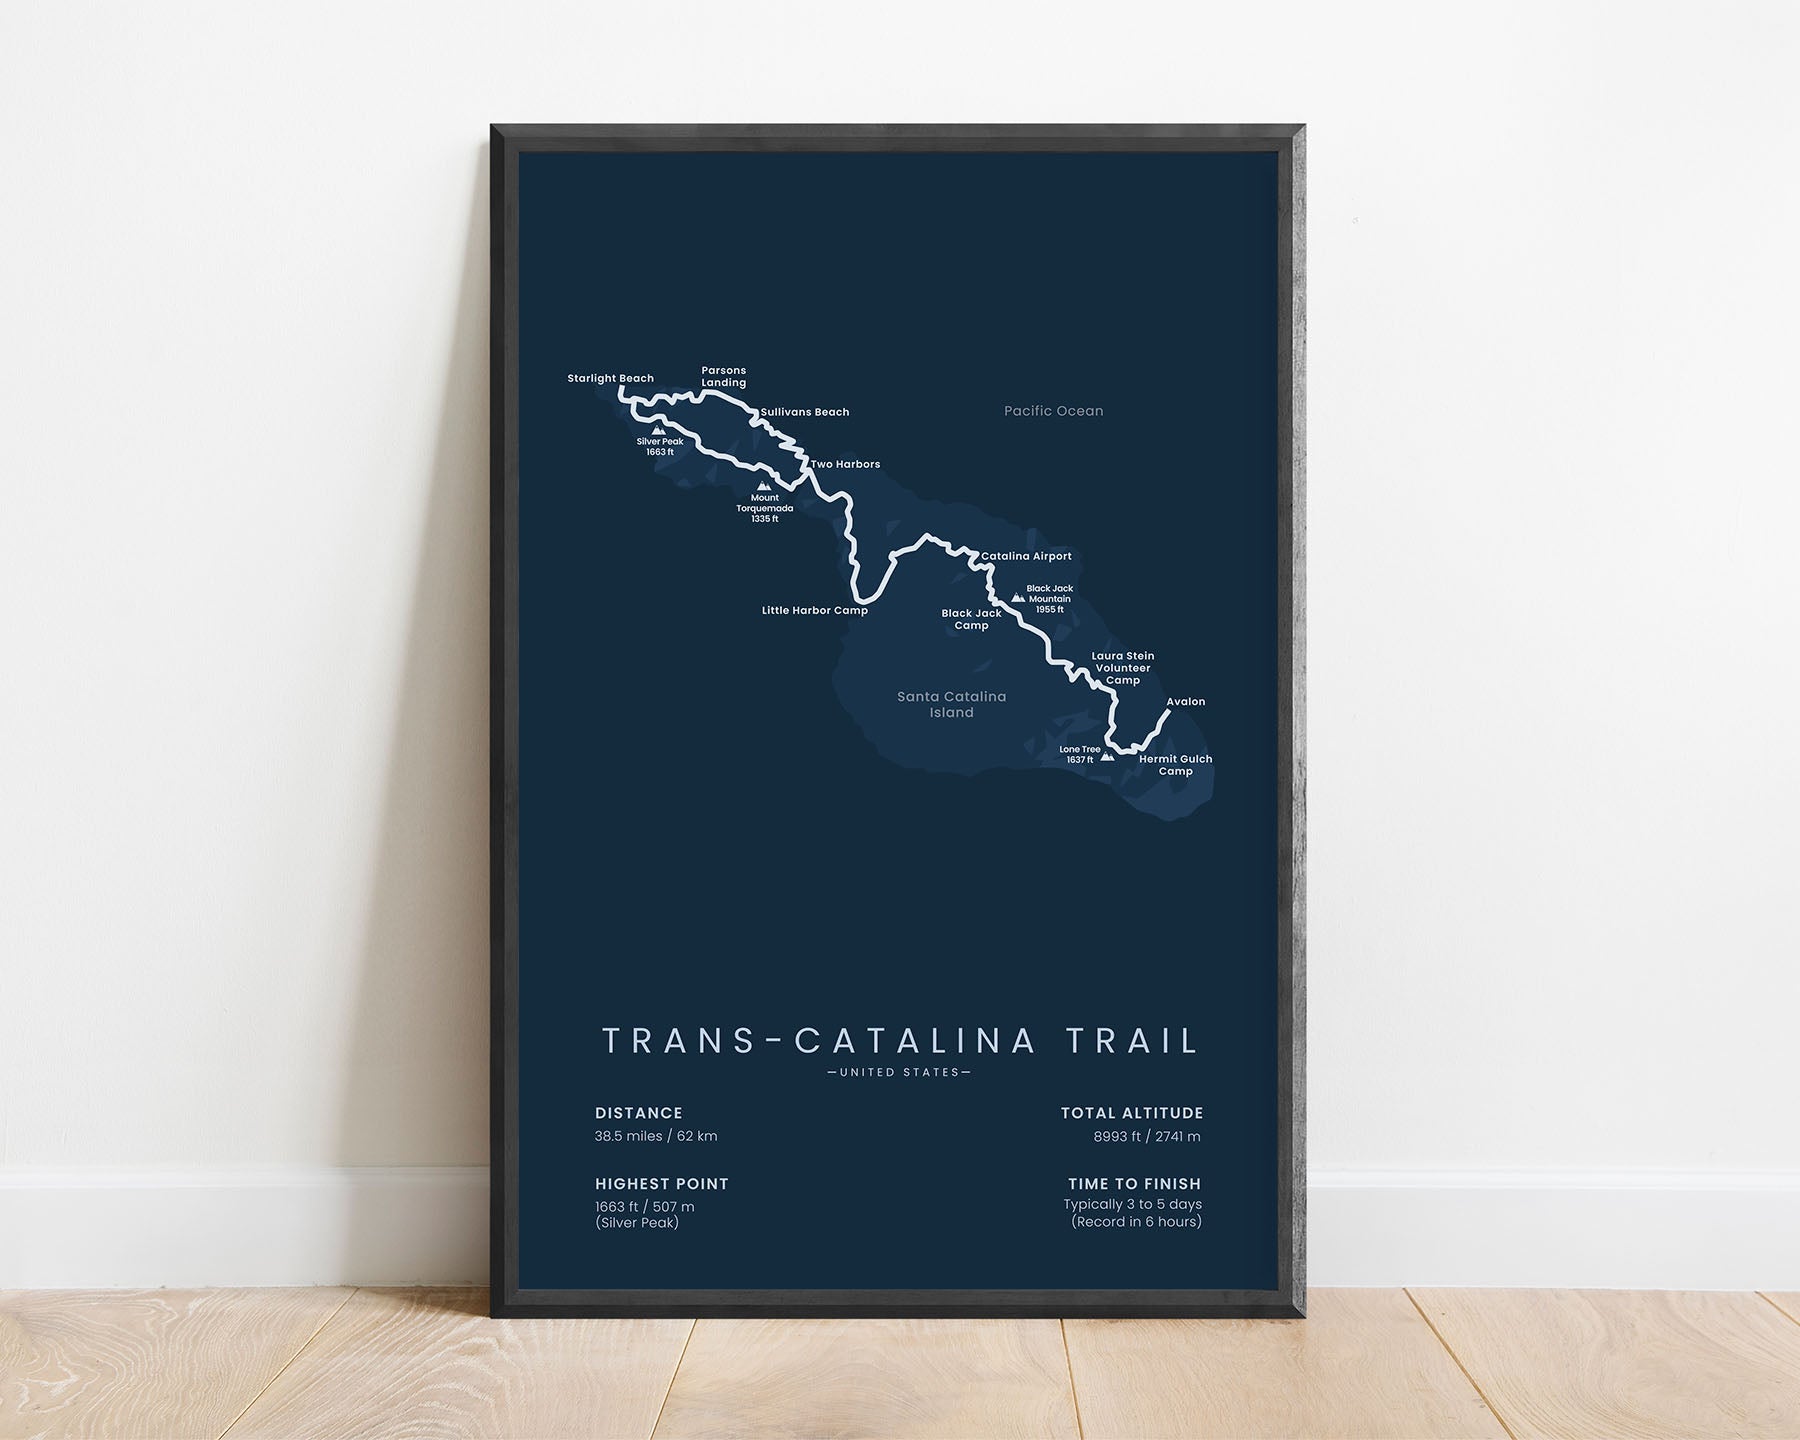 TCT (Santa Catalina Island) route wall art with blue background